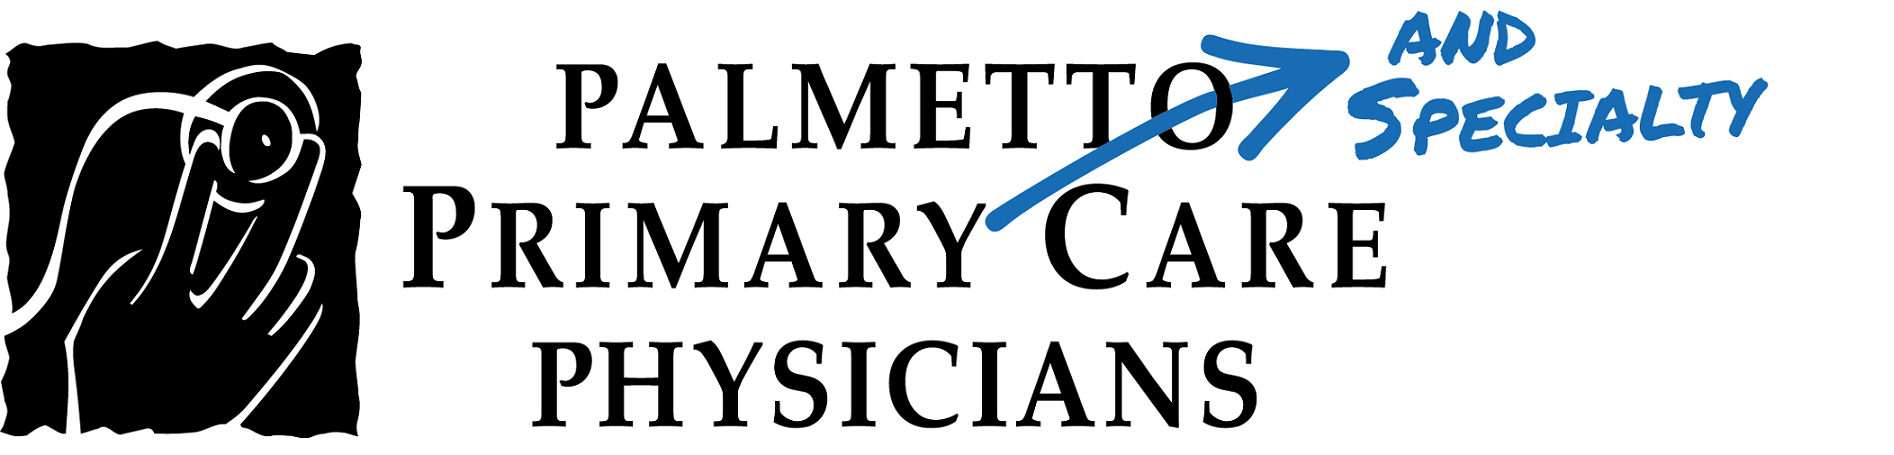 Palmetto Primary and Special Care Physicians